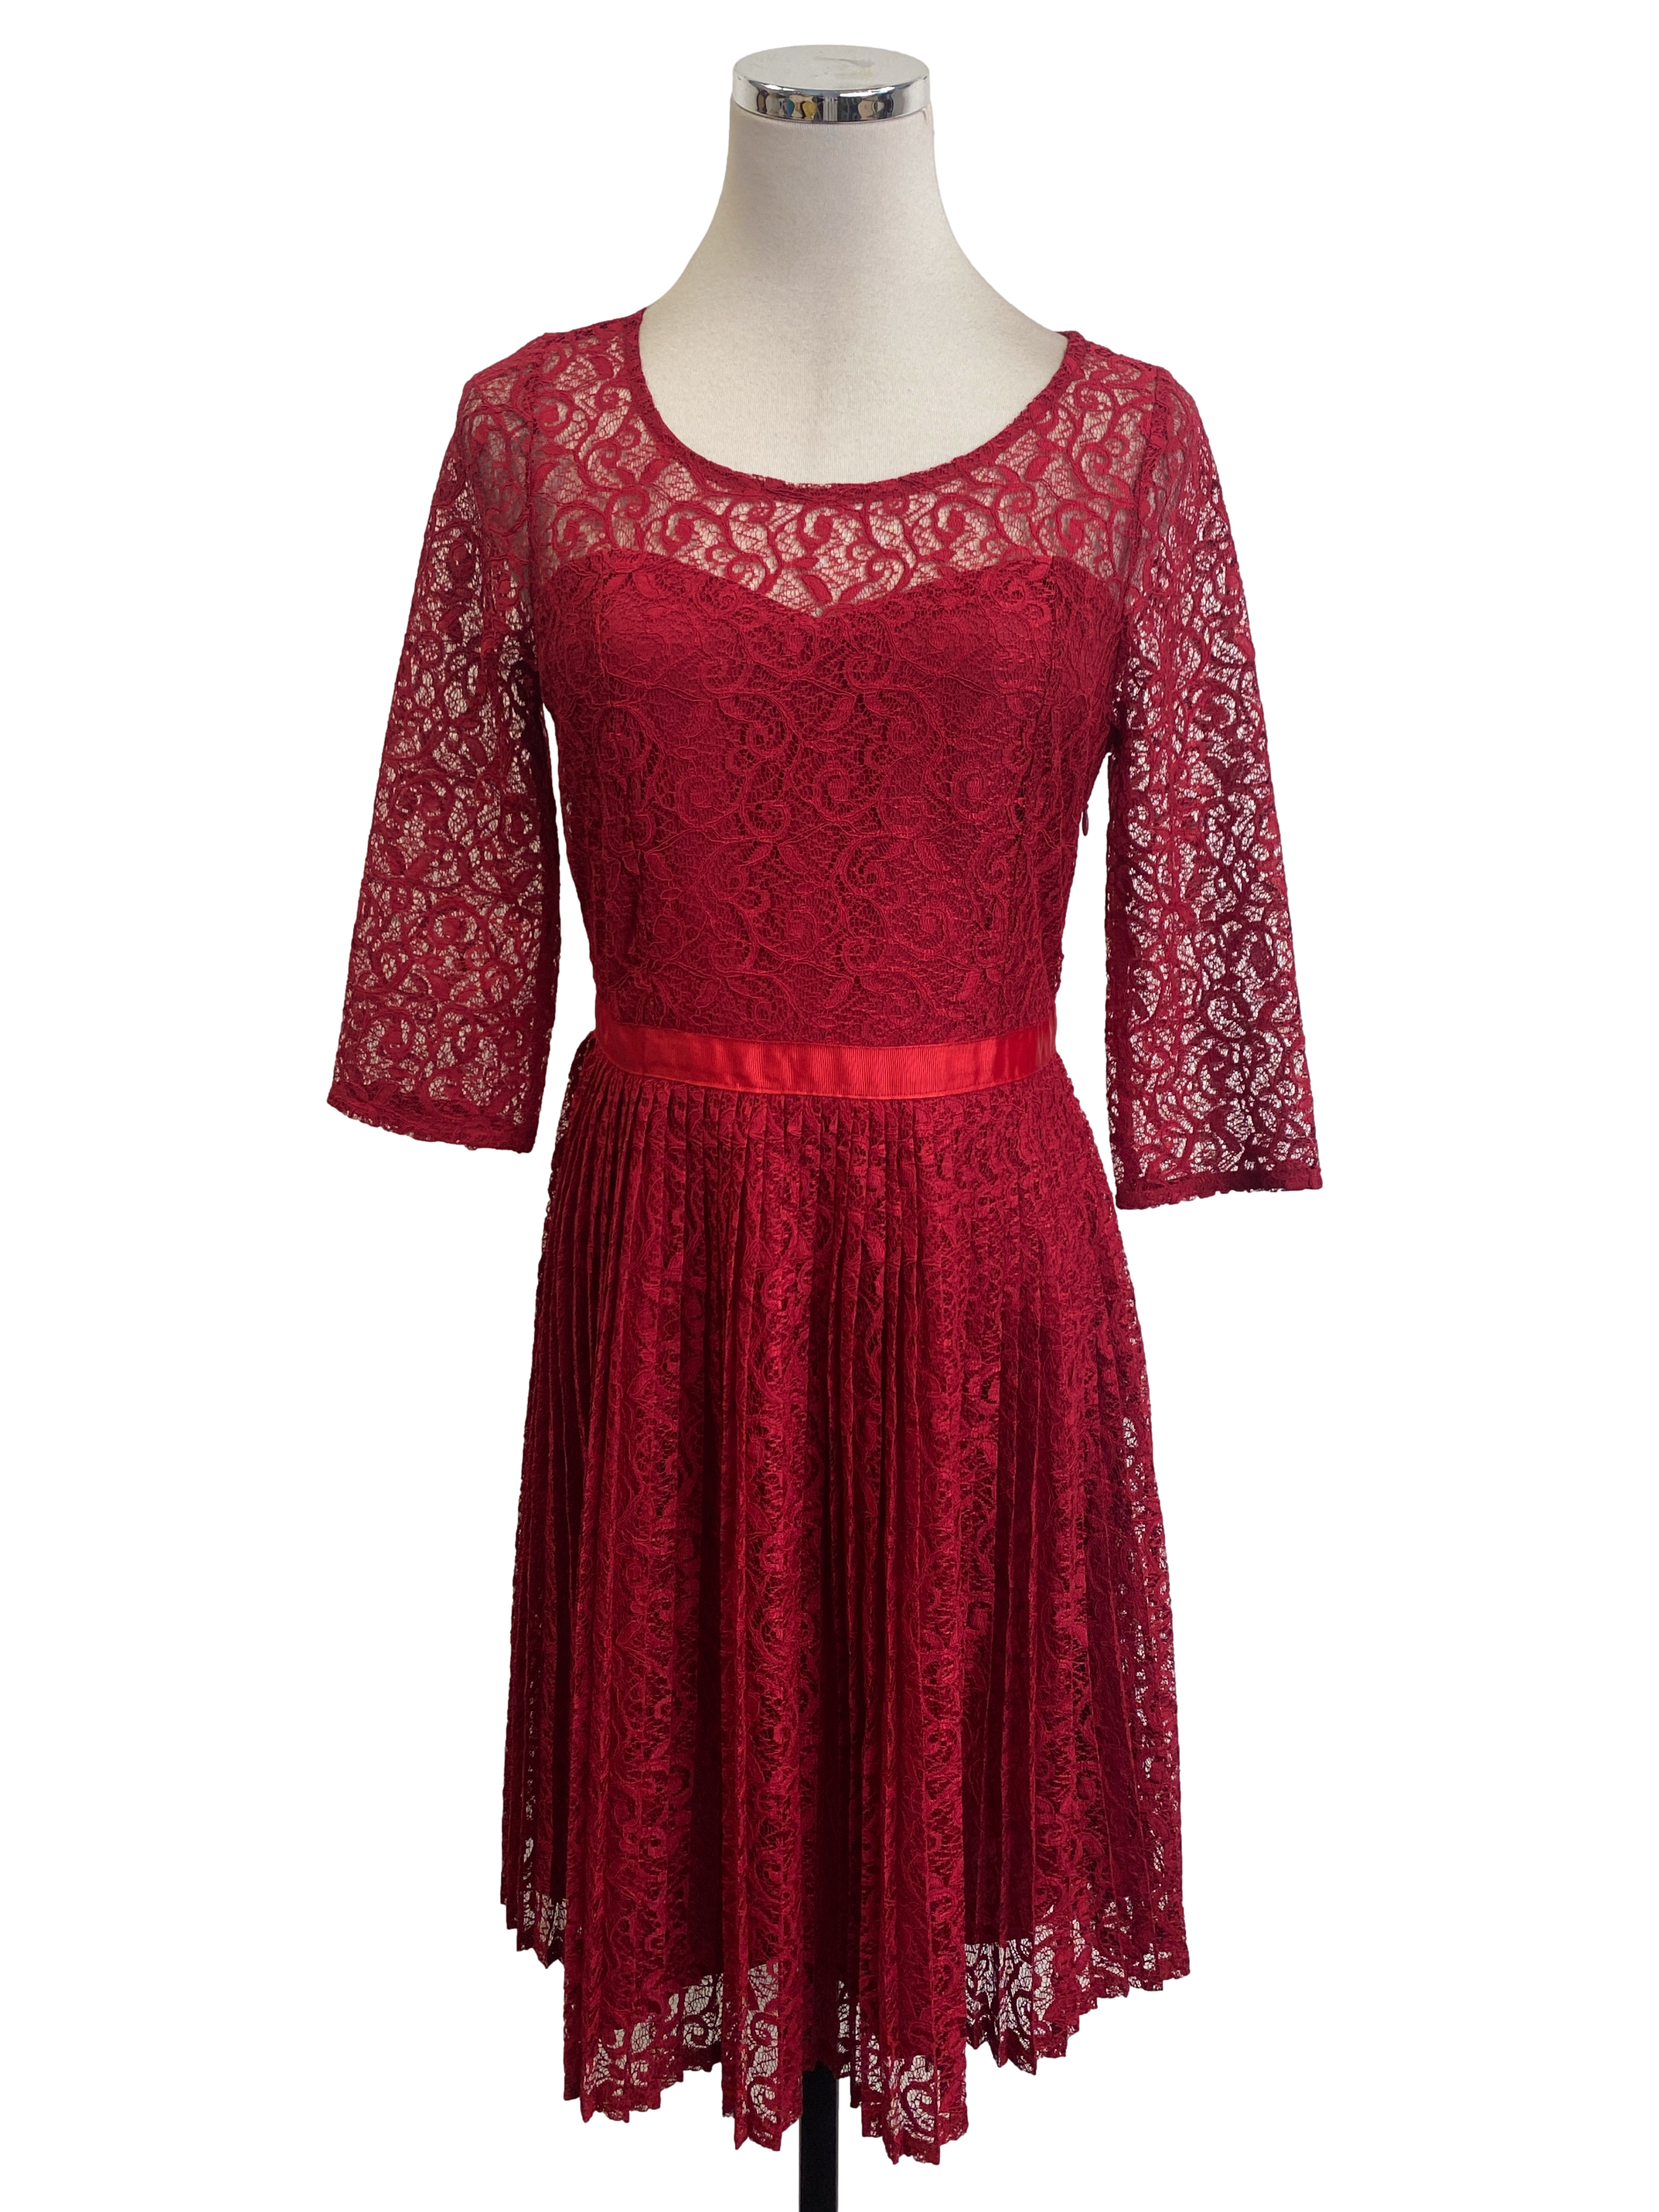 Lipstick Red Knife Pleated Dress